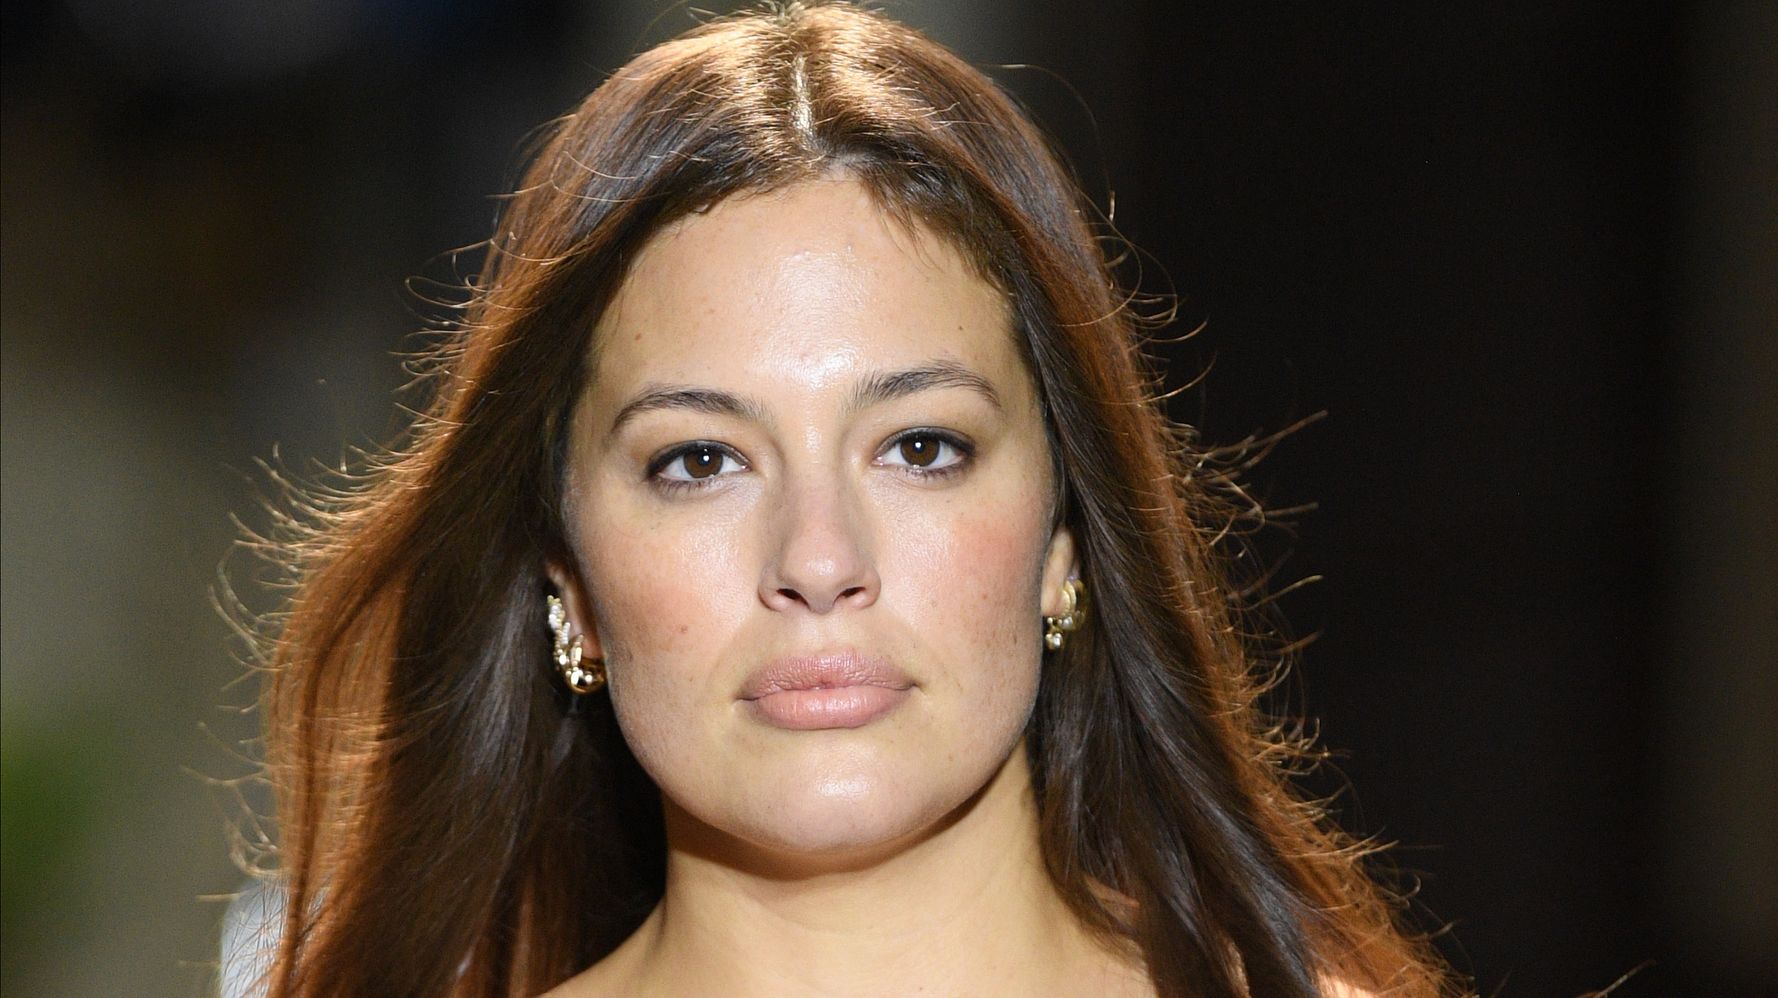 Ashley Graham Goes Full Western For Maternity Photos: 'Giddy Up, Baby'